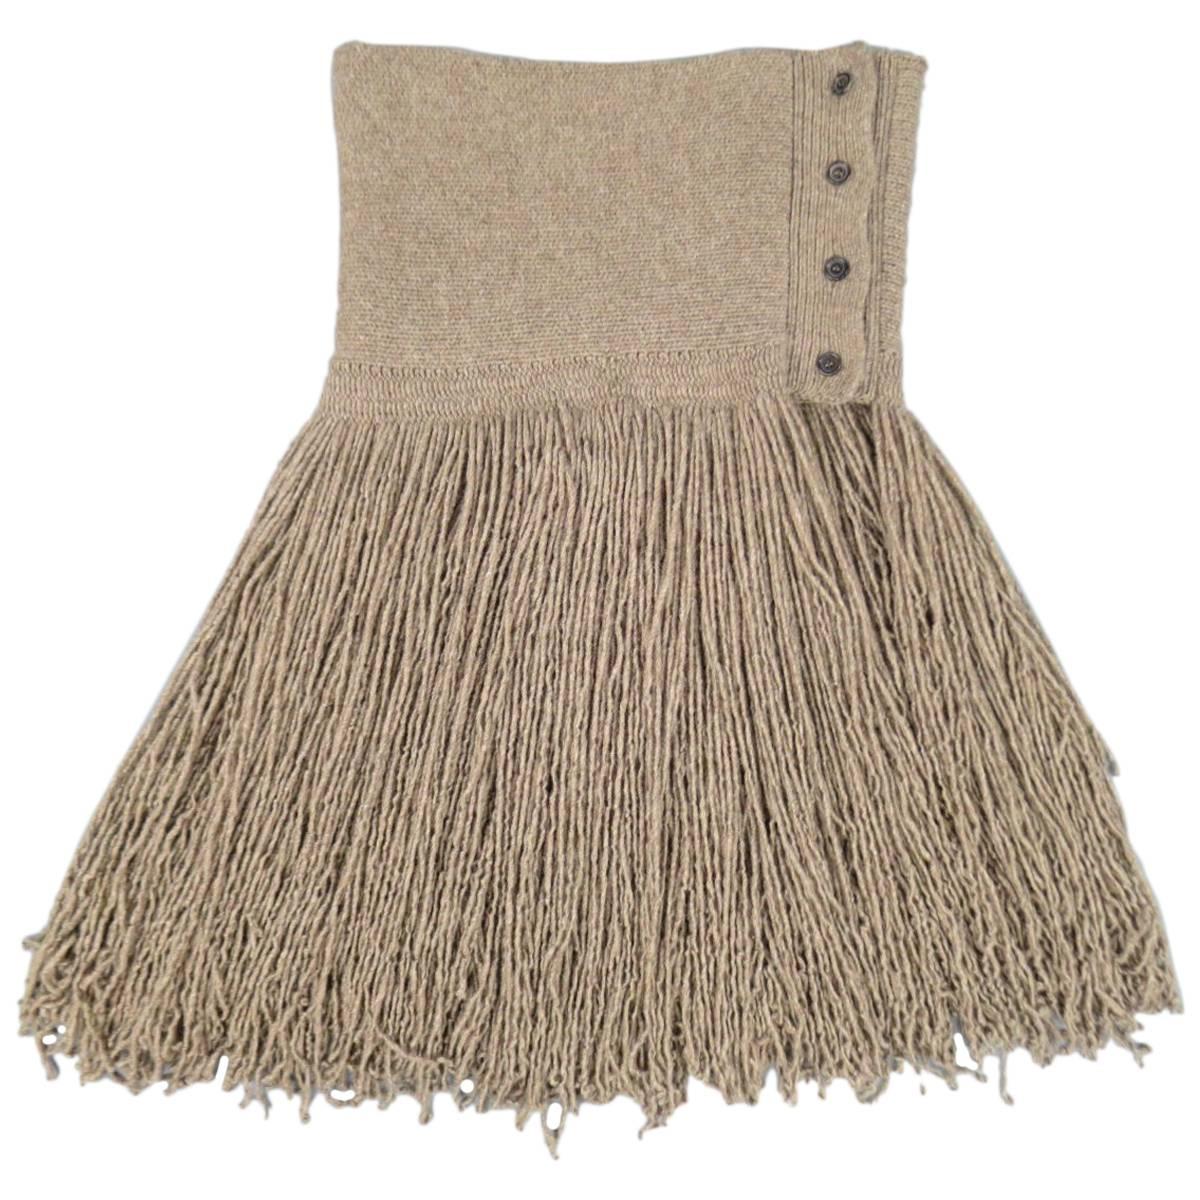 RALPH LAUREN Fall 2015 COLLECTION Taupe Cashmere Fringe Scarf Shawl